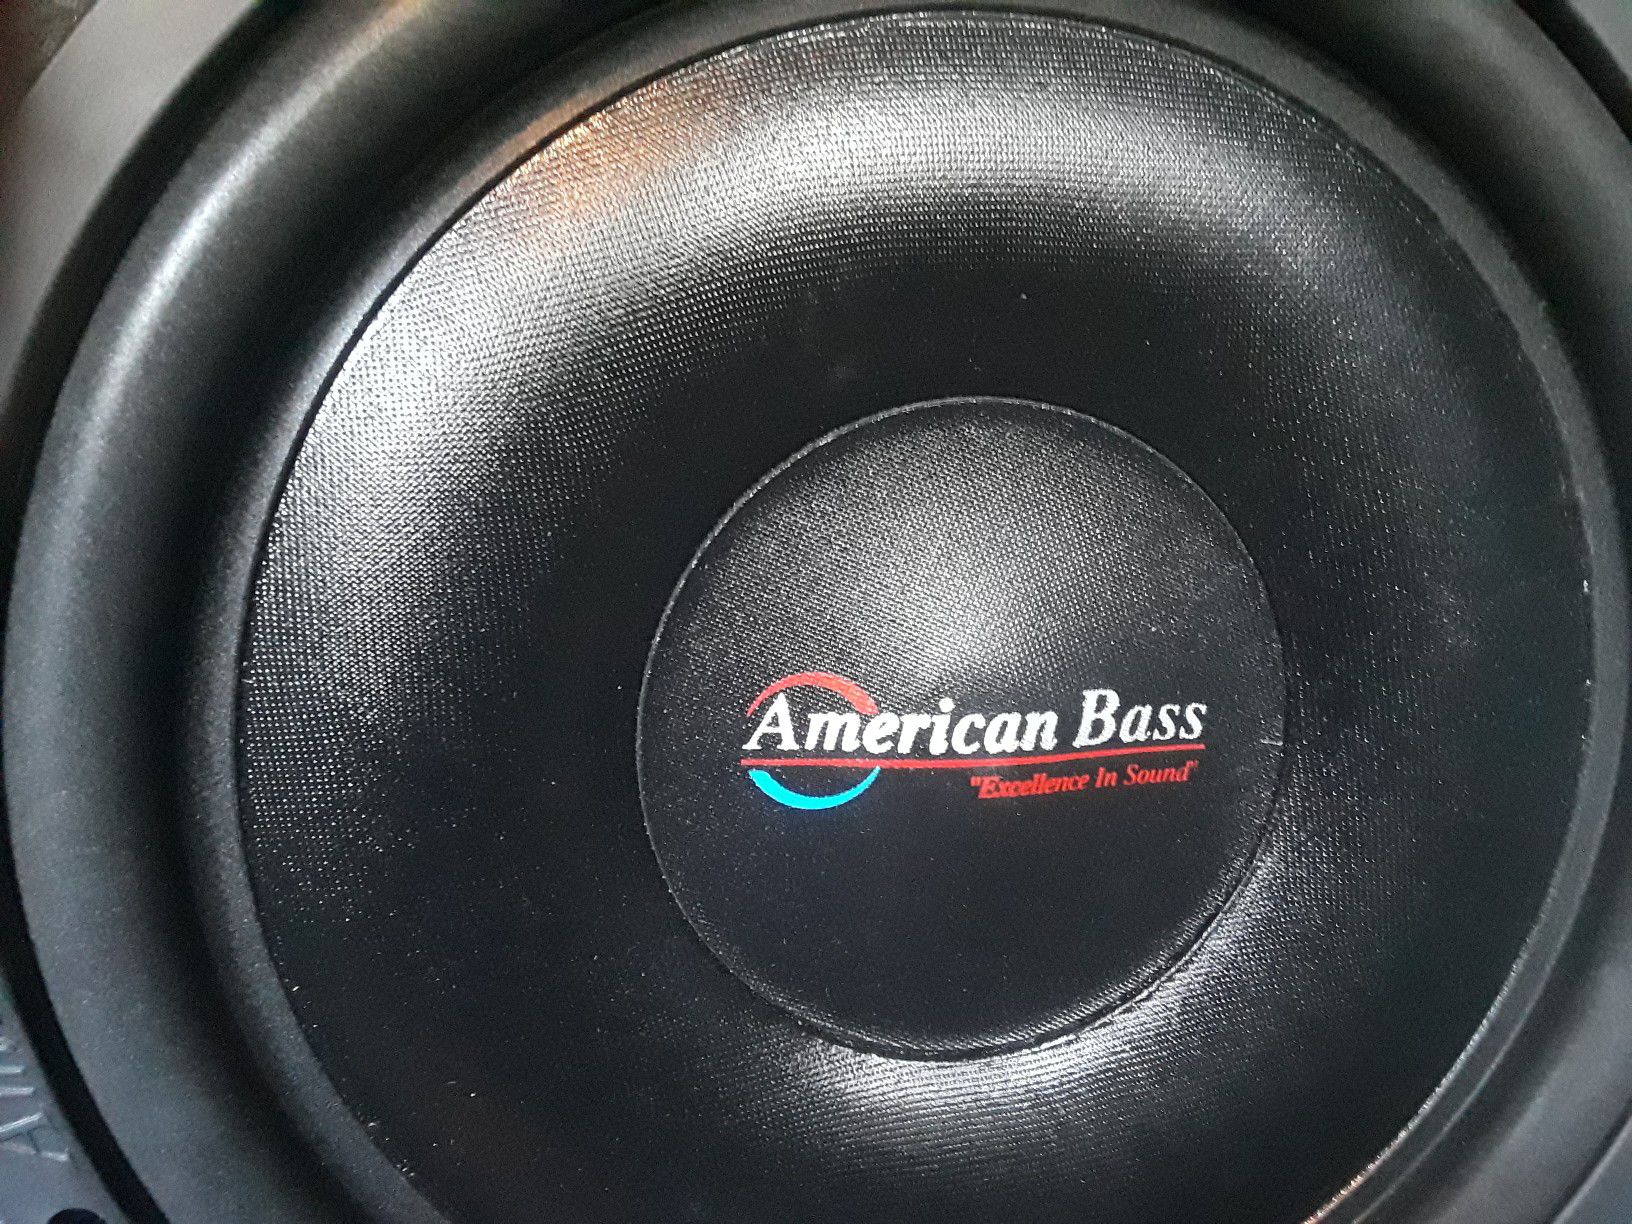 2/12 American Bass subwoofers